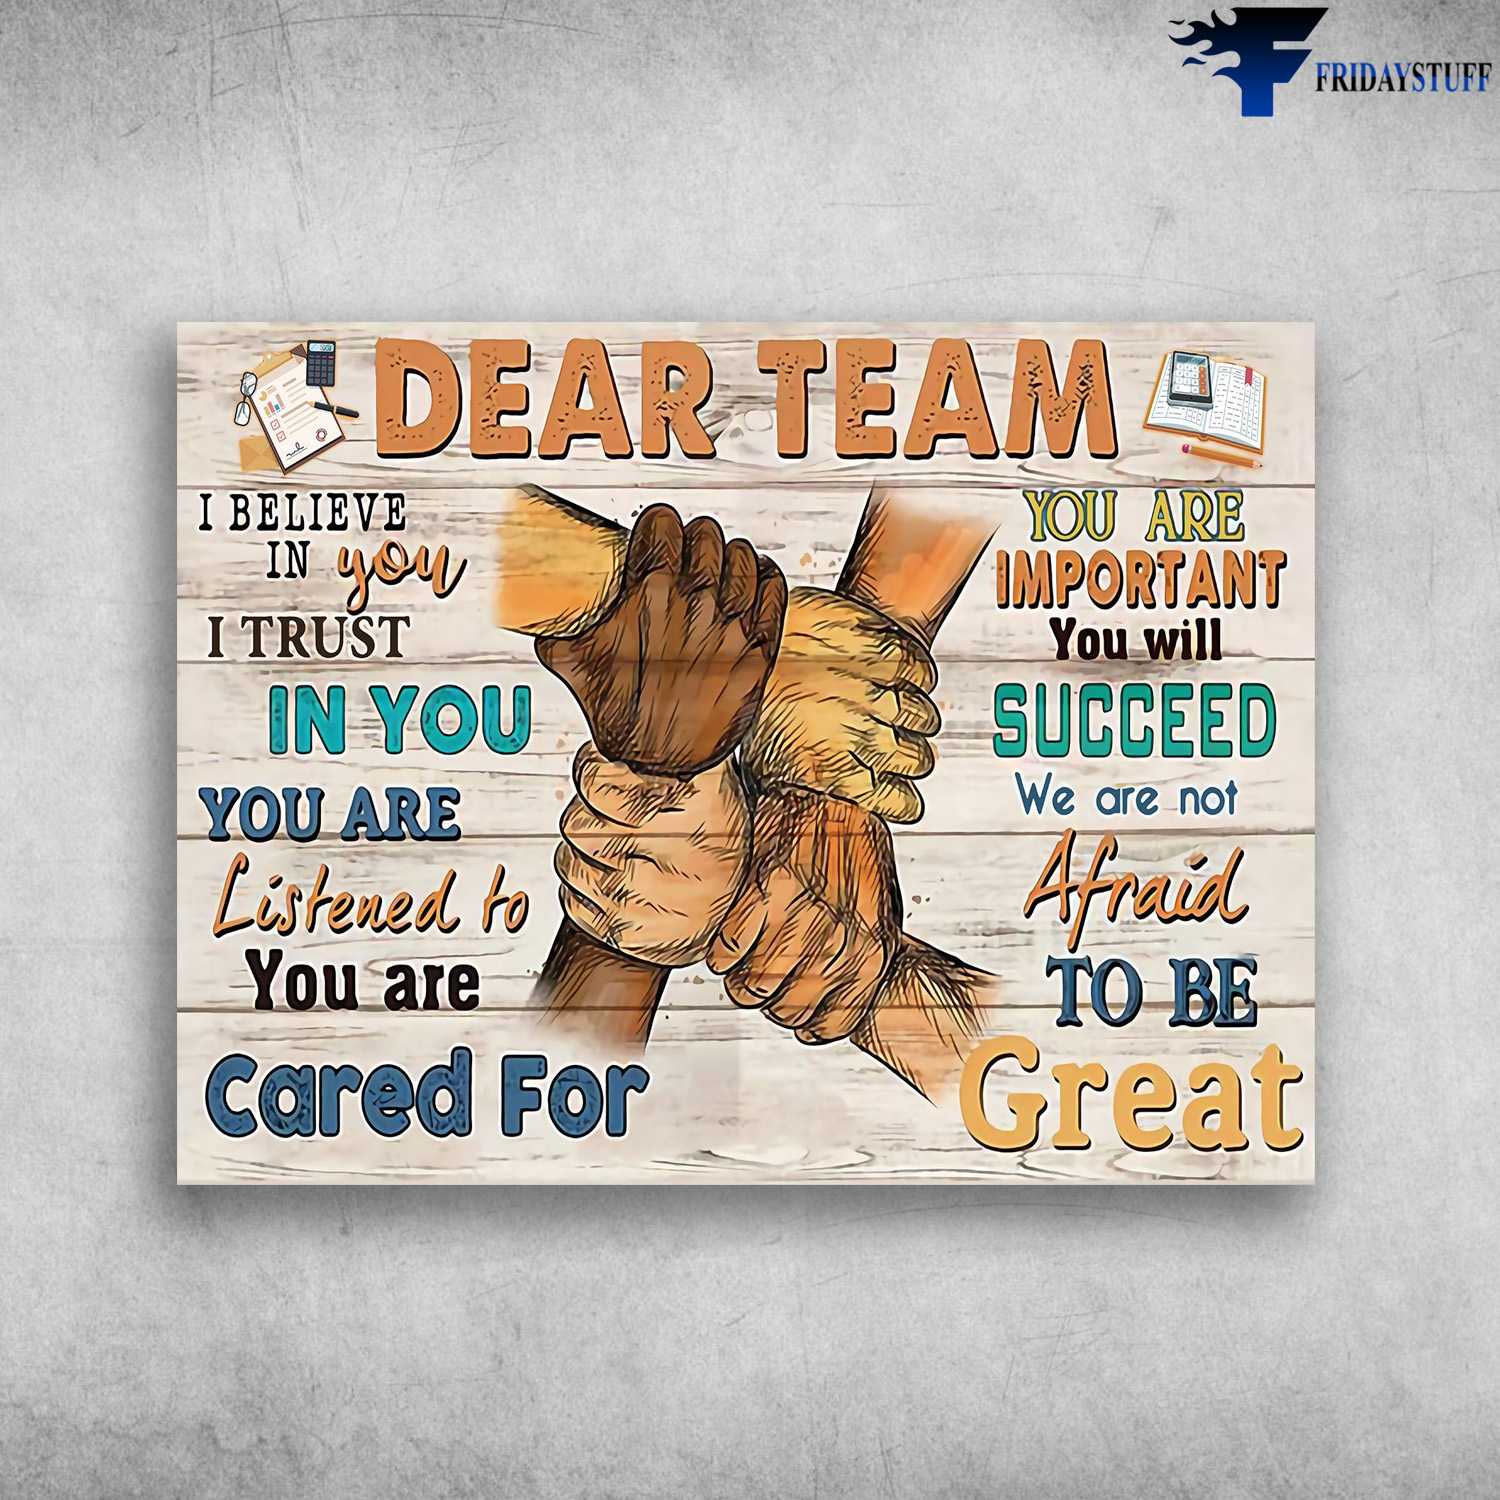 Team Work Poster - Dear Team, I Believe In You, I Trust In You, You Are Listened To, You Are Cared For, You Are Important